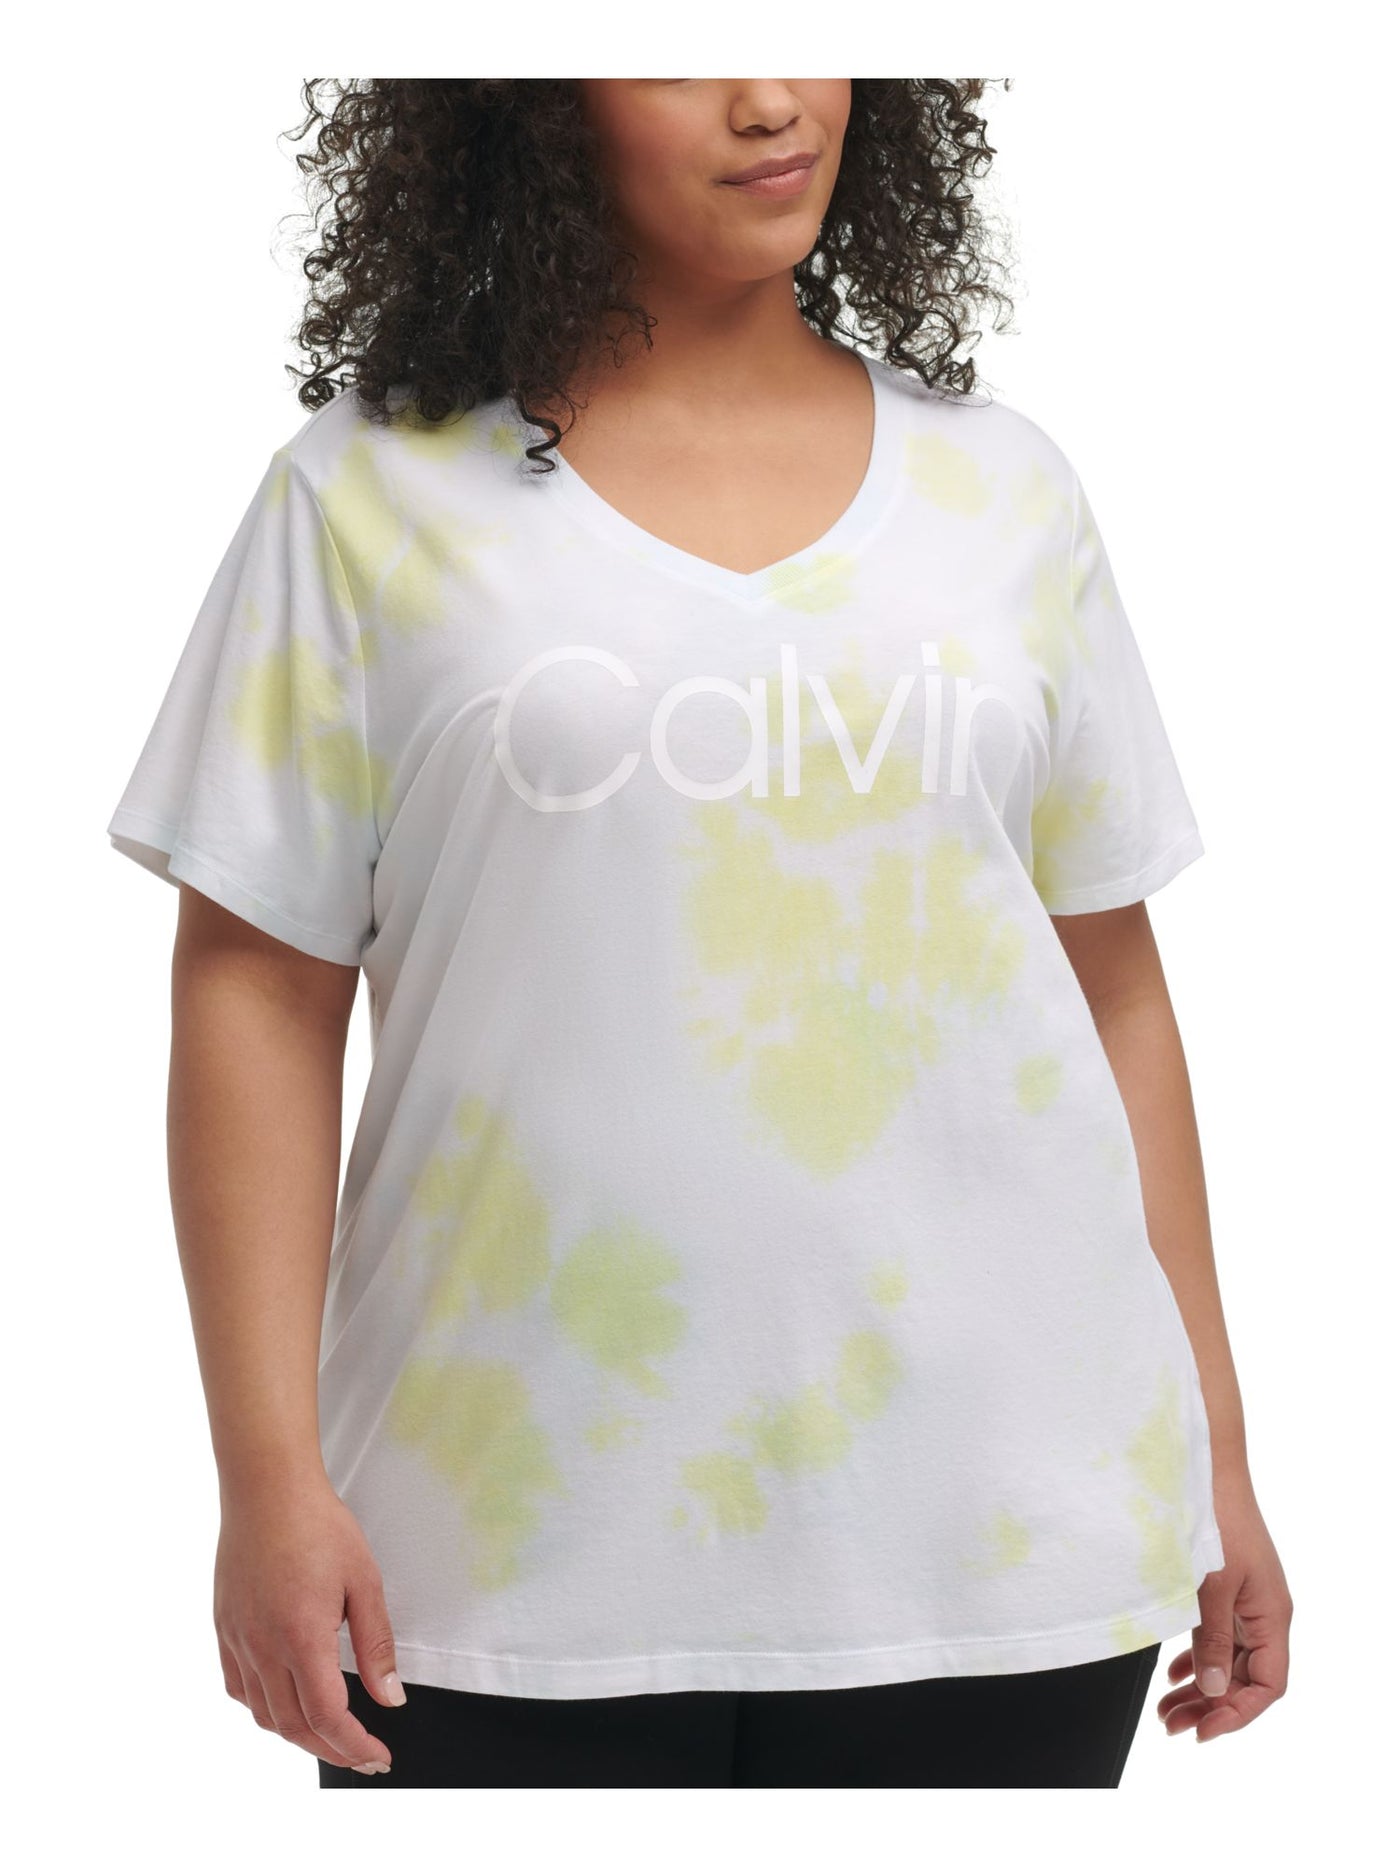 CALVIN KLEIN PERFORMANCE Womens Yellow Stretch Moisture Wicking Relaxed-fit Short Sleeve V Neck Active Wear T-Shirt Plus 1X